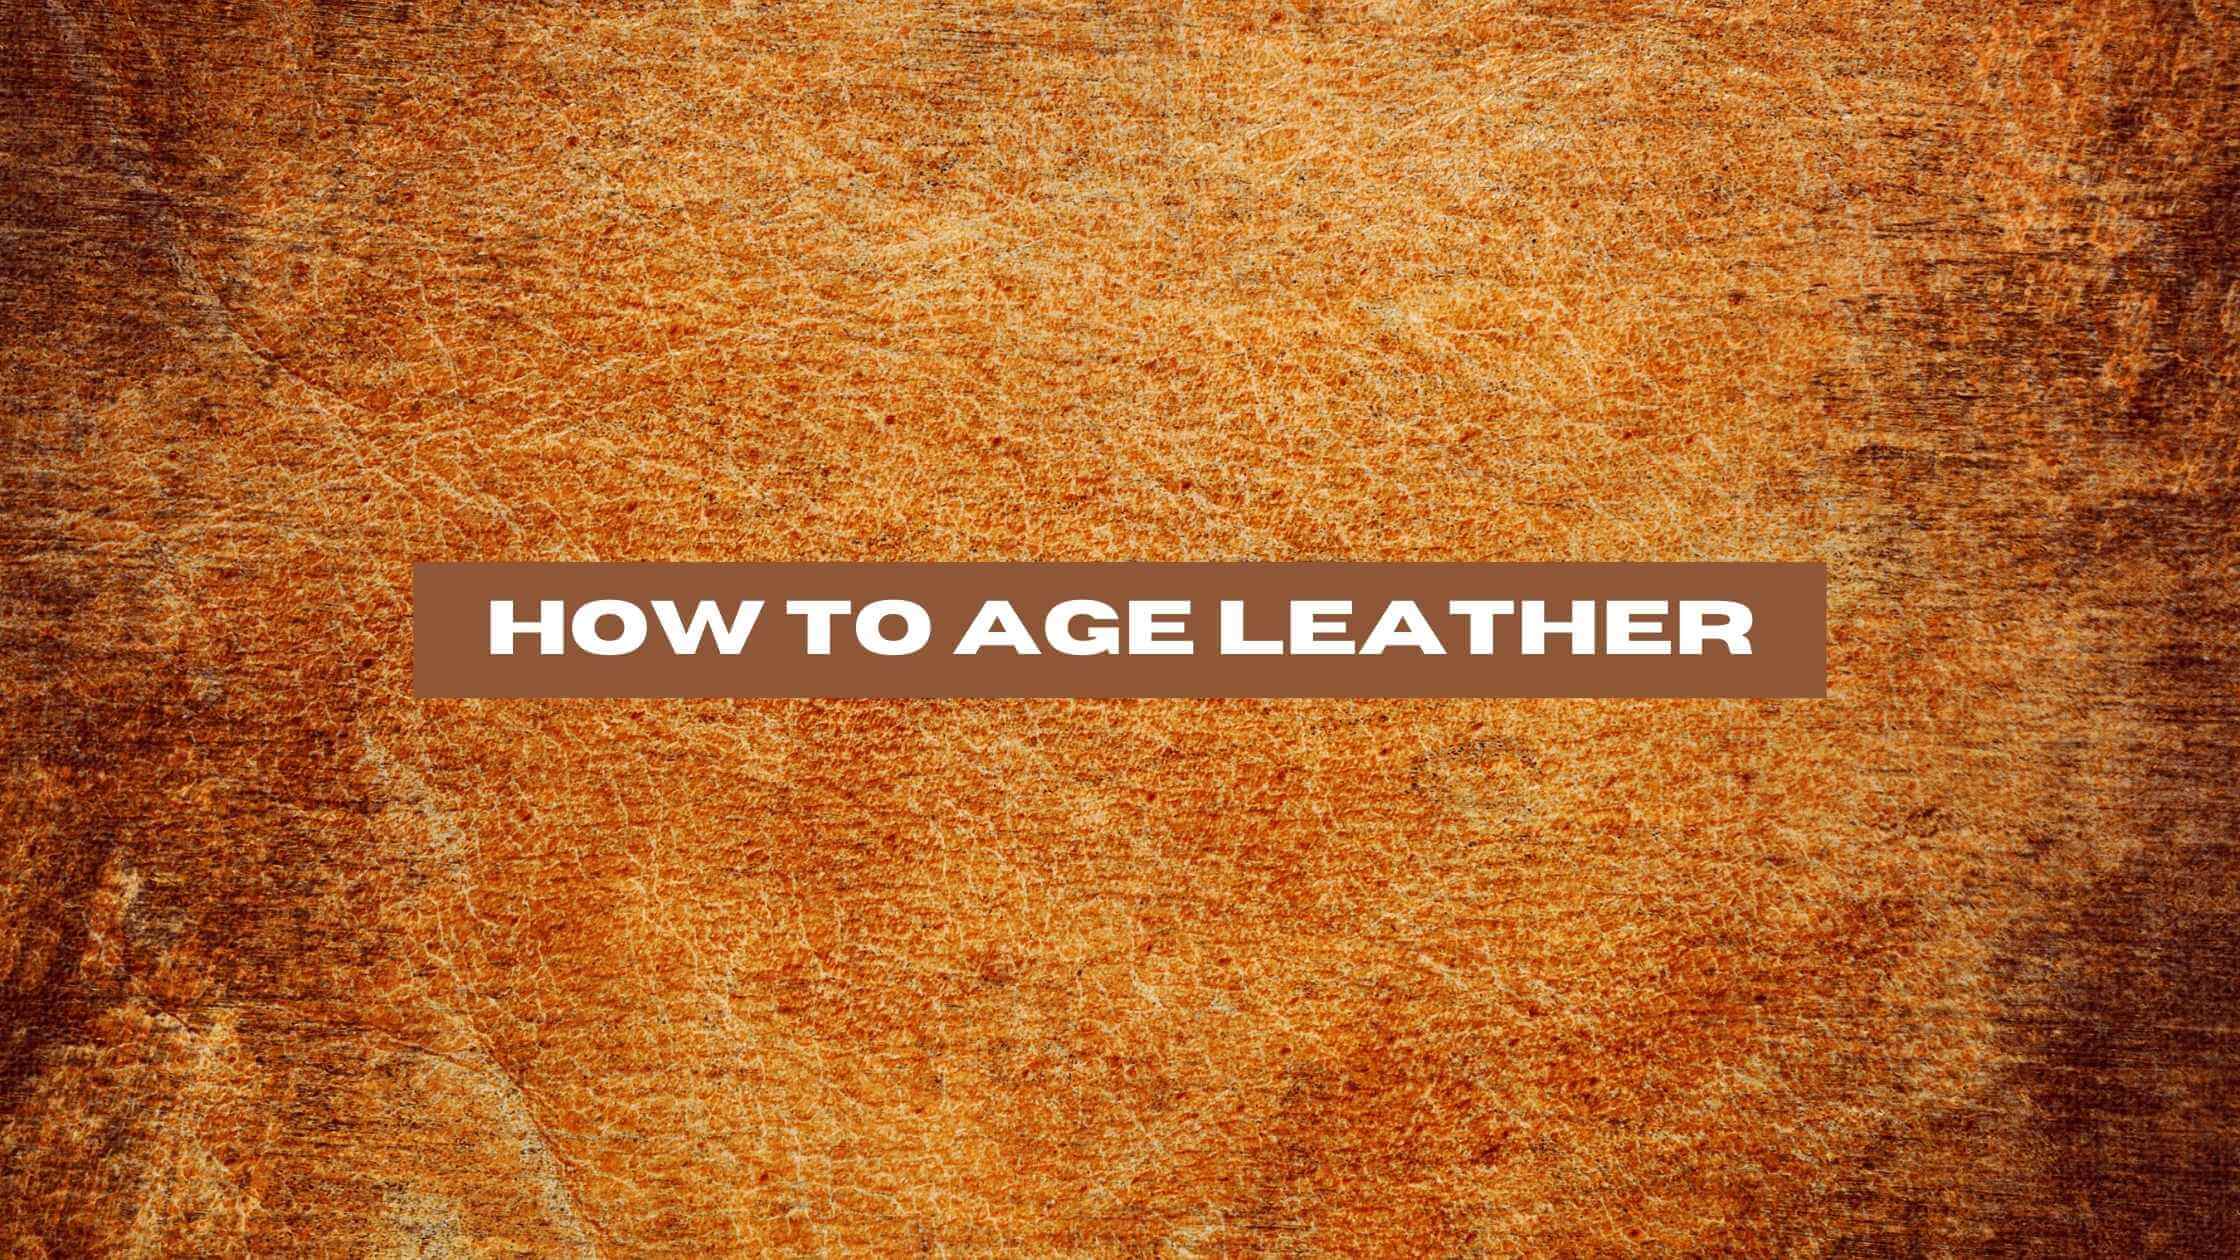 How to Age Leather